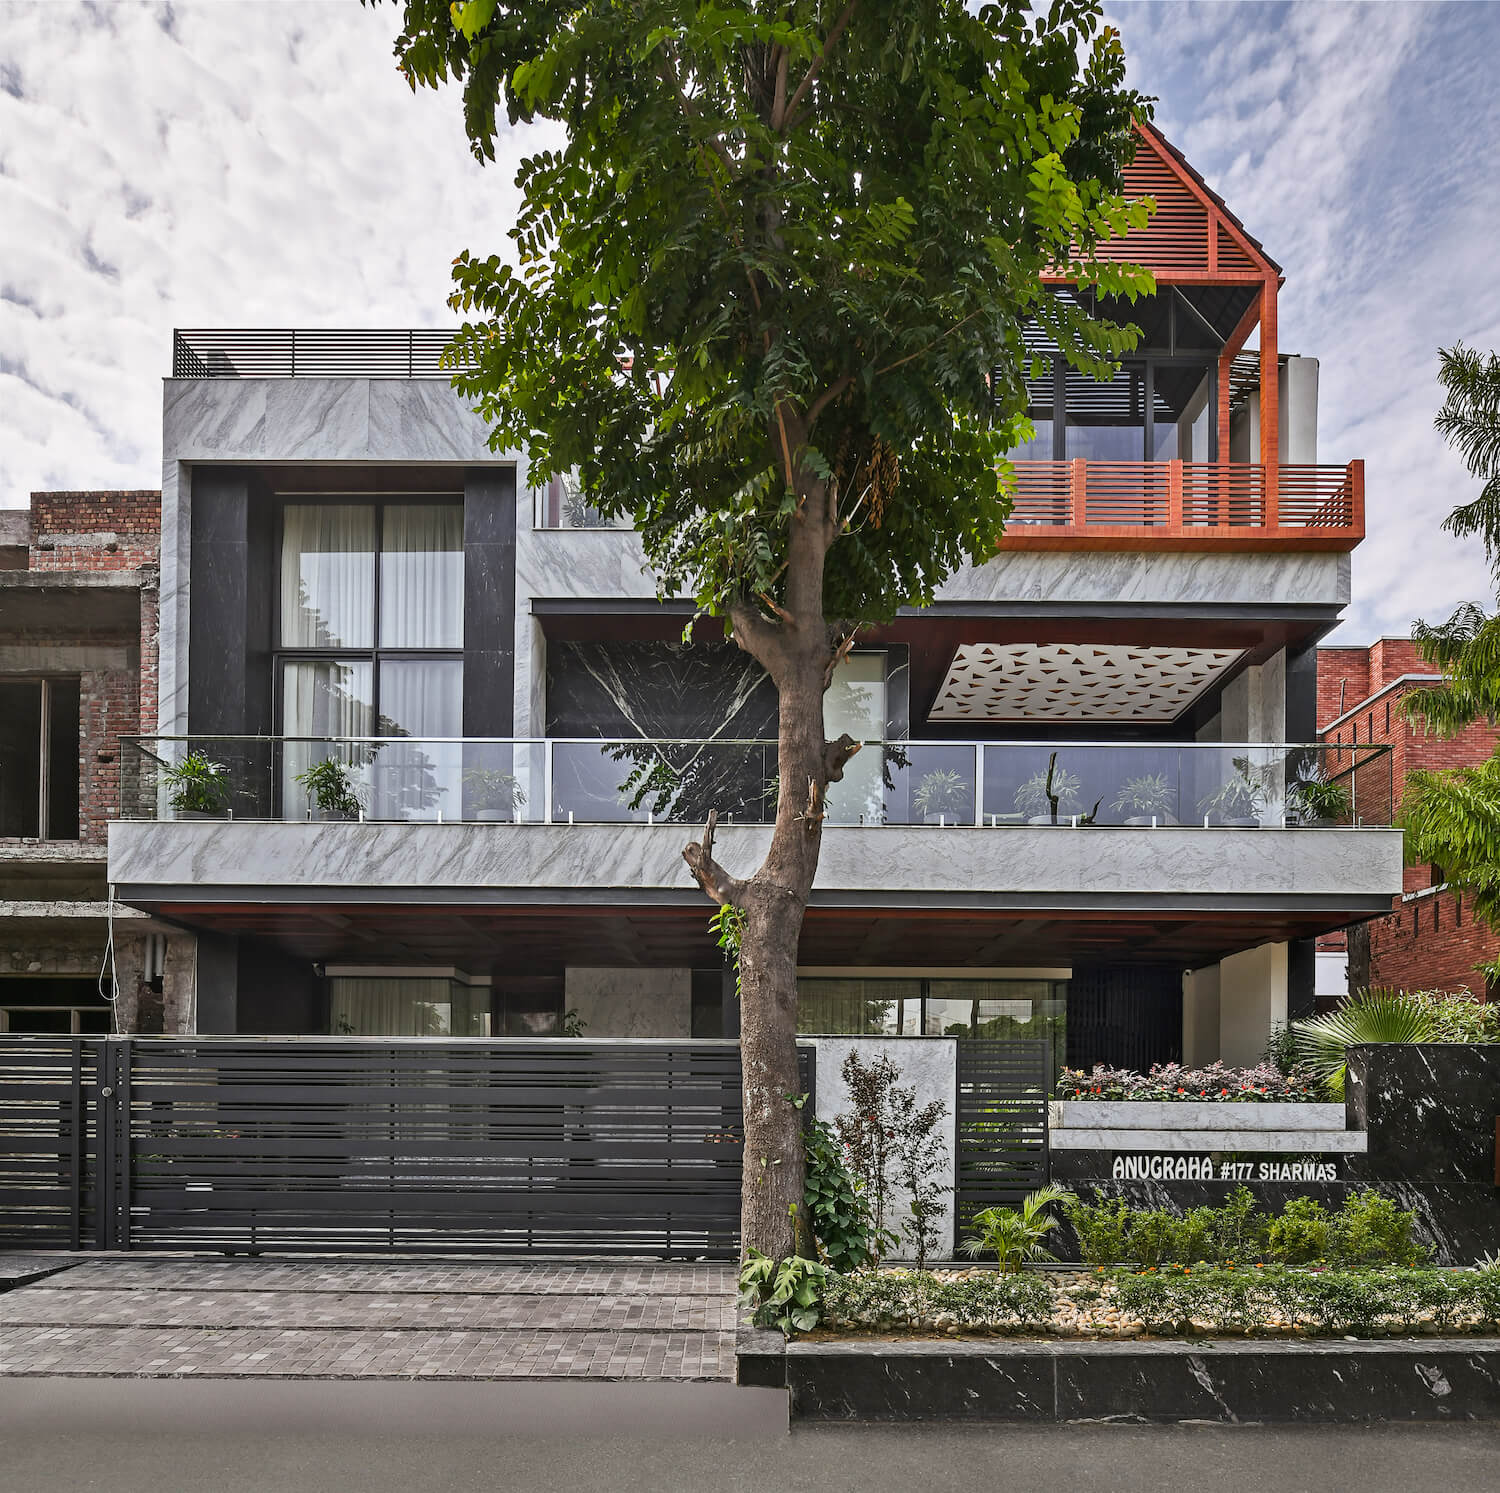 Anugraha House in Chandigarh, India by S